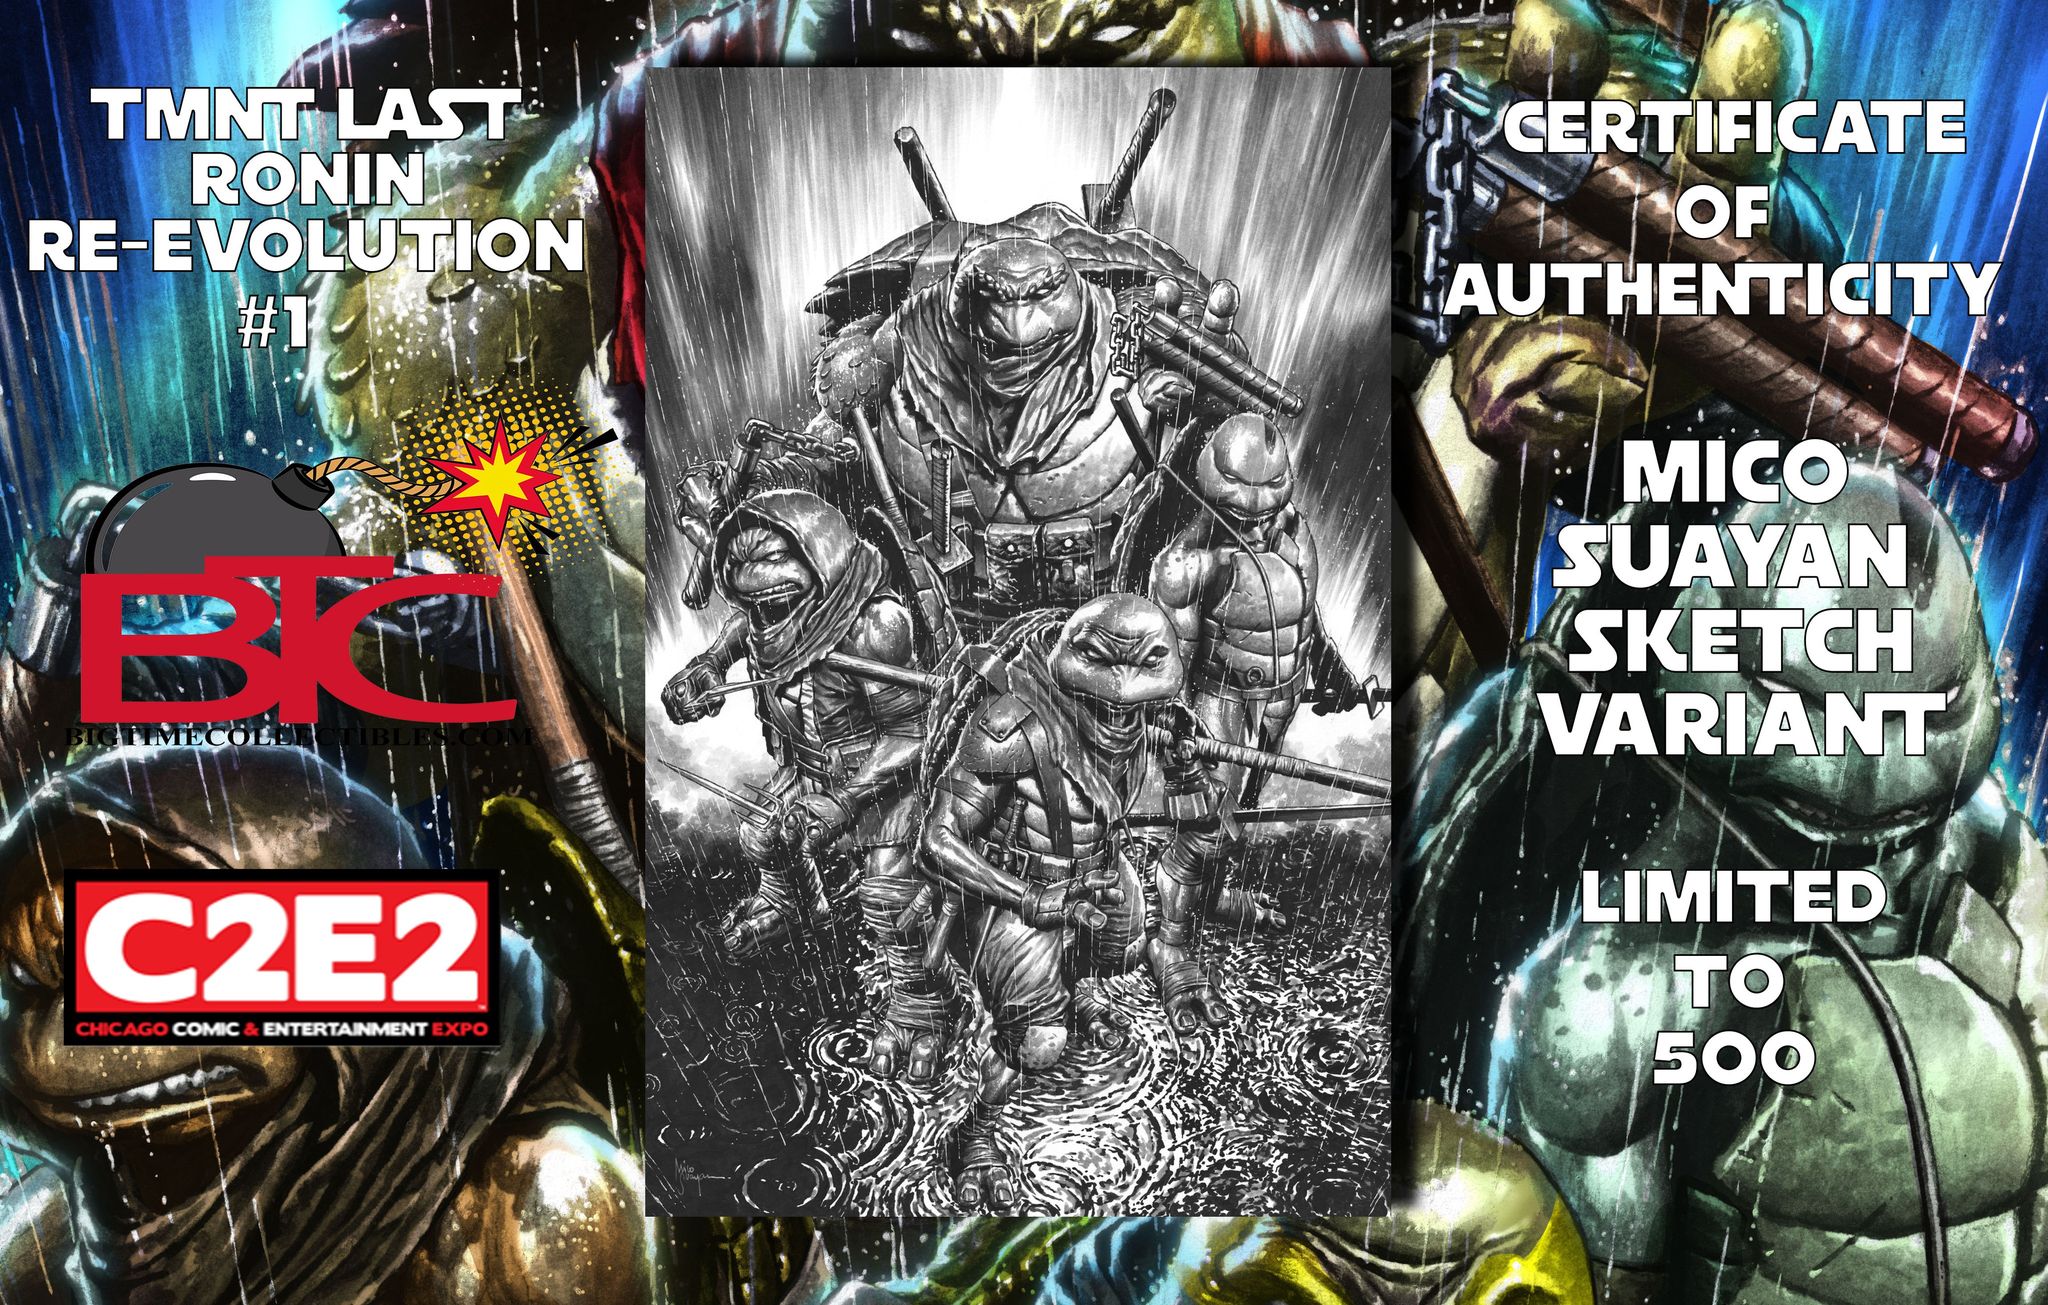 TMNT THE LAST RONIN RE-EVOLUTION #1 MICO SUAYAN C2E2 EXCLUSIVE SKETCH VARIANT OPTIONS